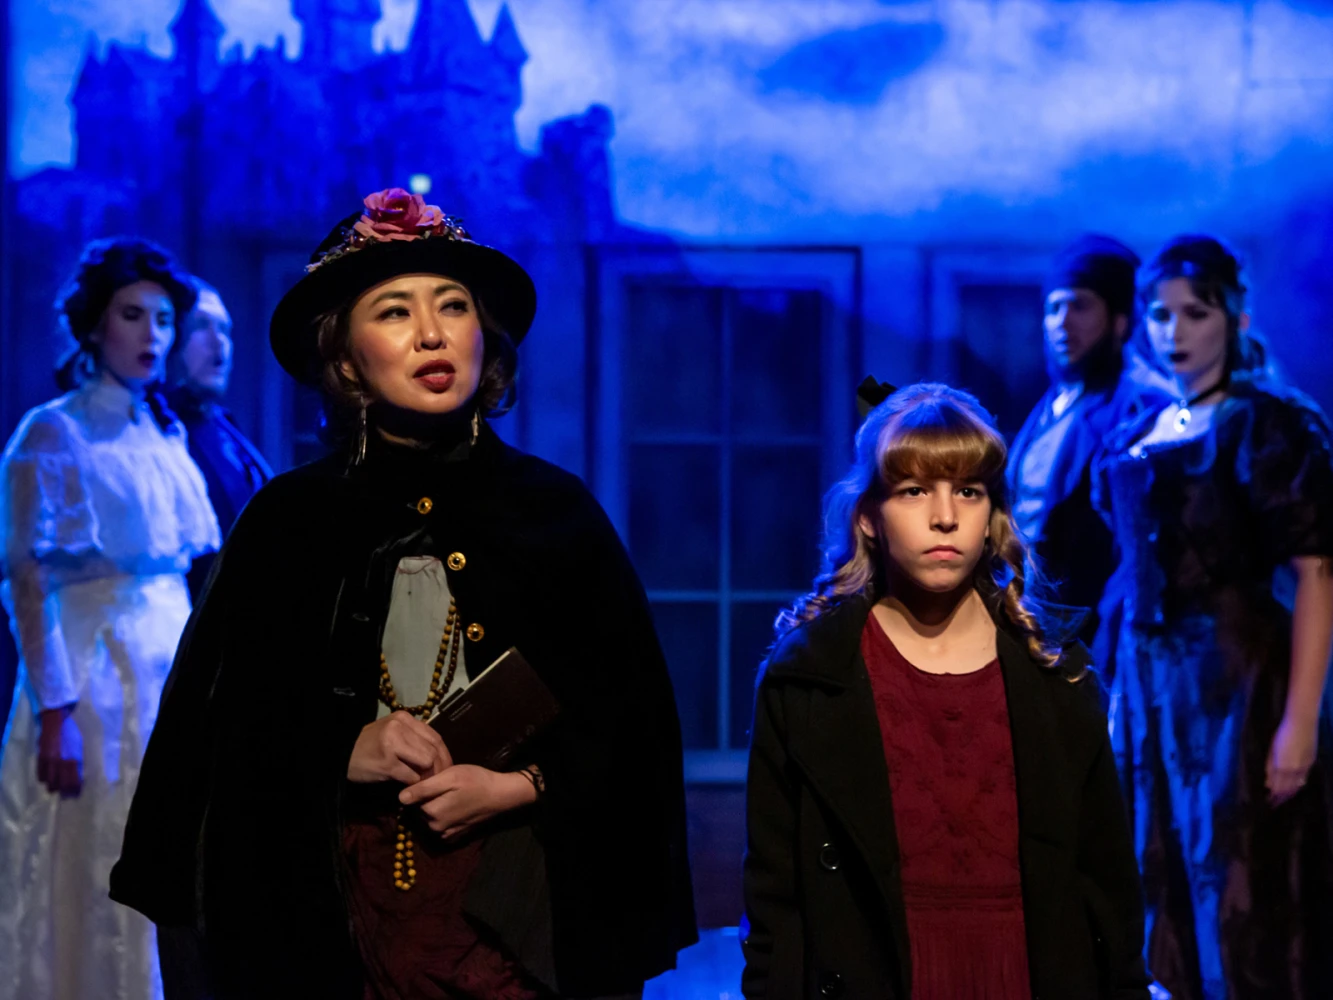 The Secret Garden, the Musical: What to expect - 7